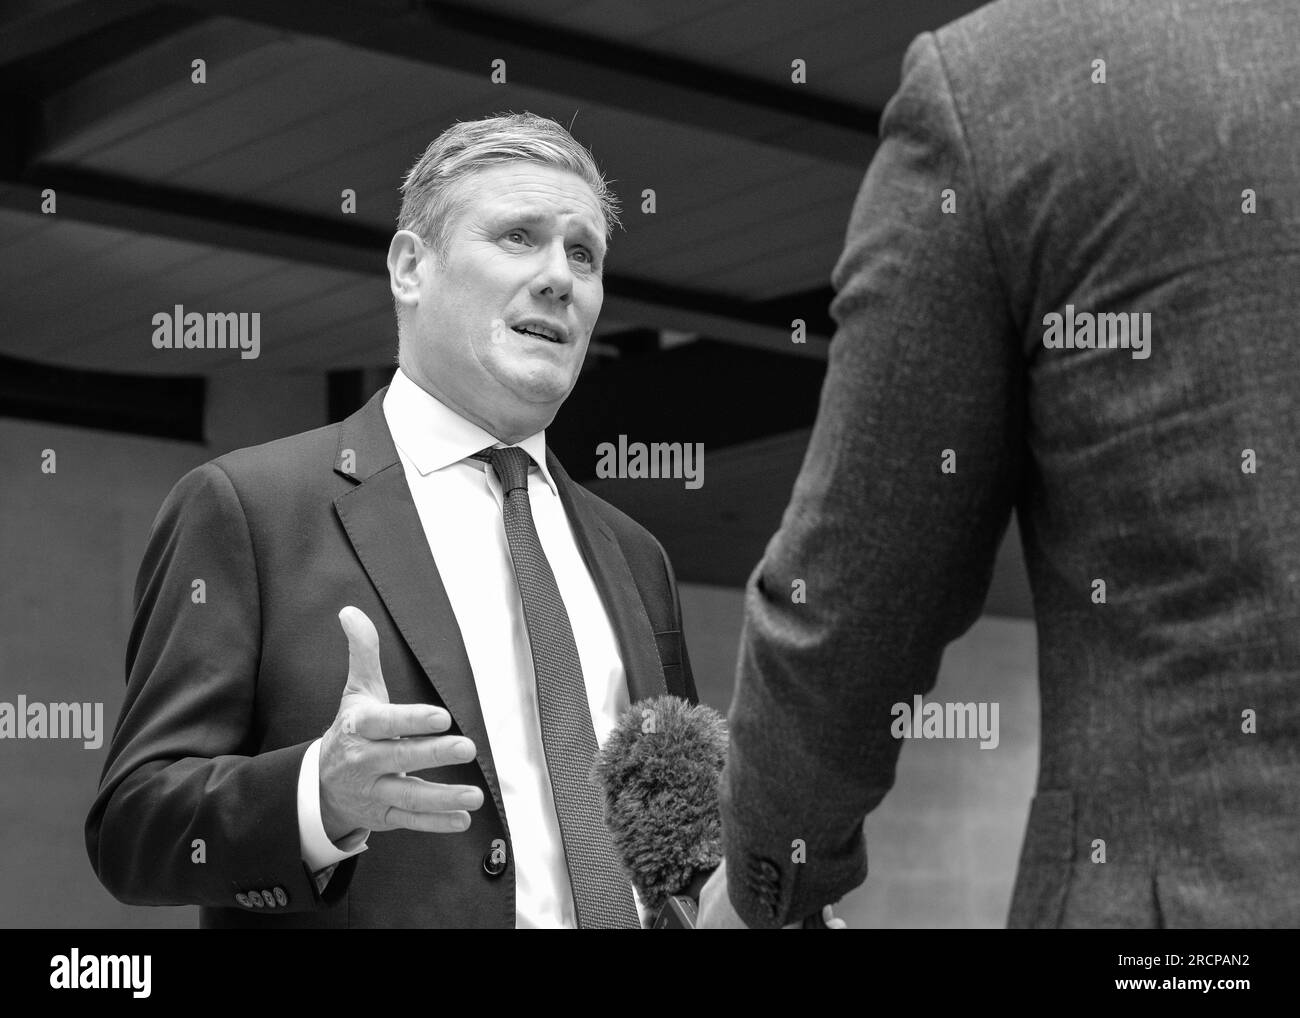 Keir starmer Black and White Stock Photos & Images - Alamy